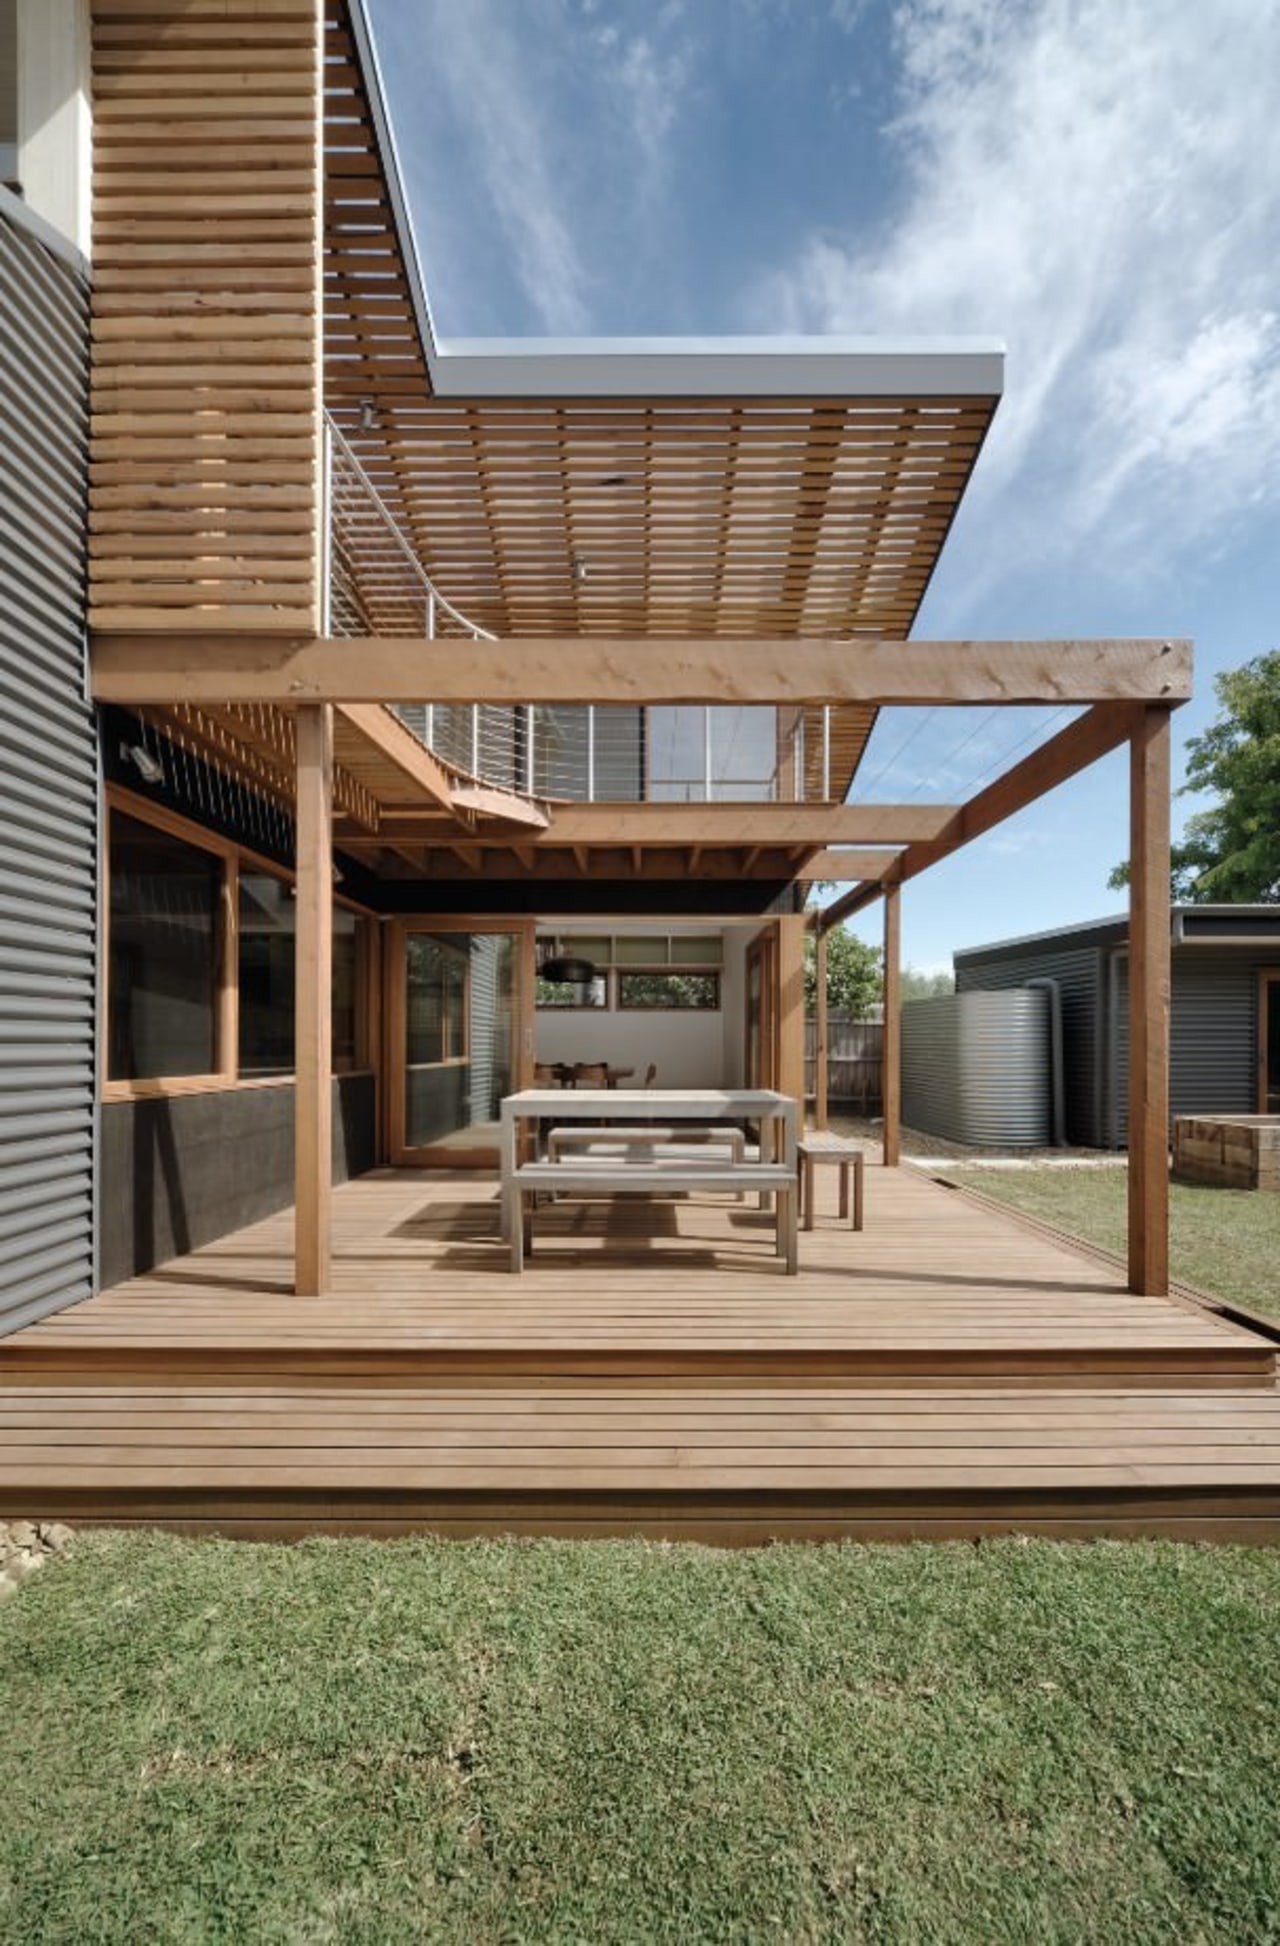 Wood slats line the upper level of this architecture, deck, elevation, facade, house, outdoor structure, real estate, residential area, siding, brown